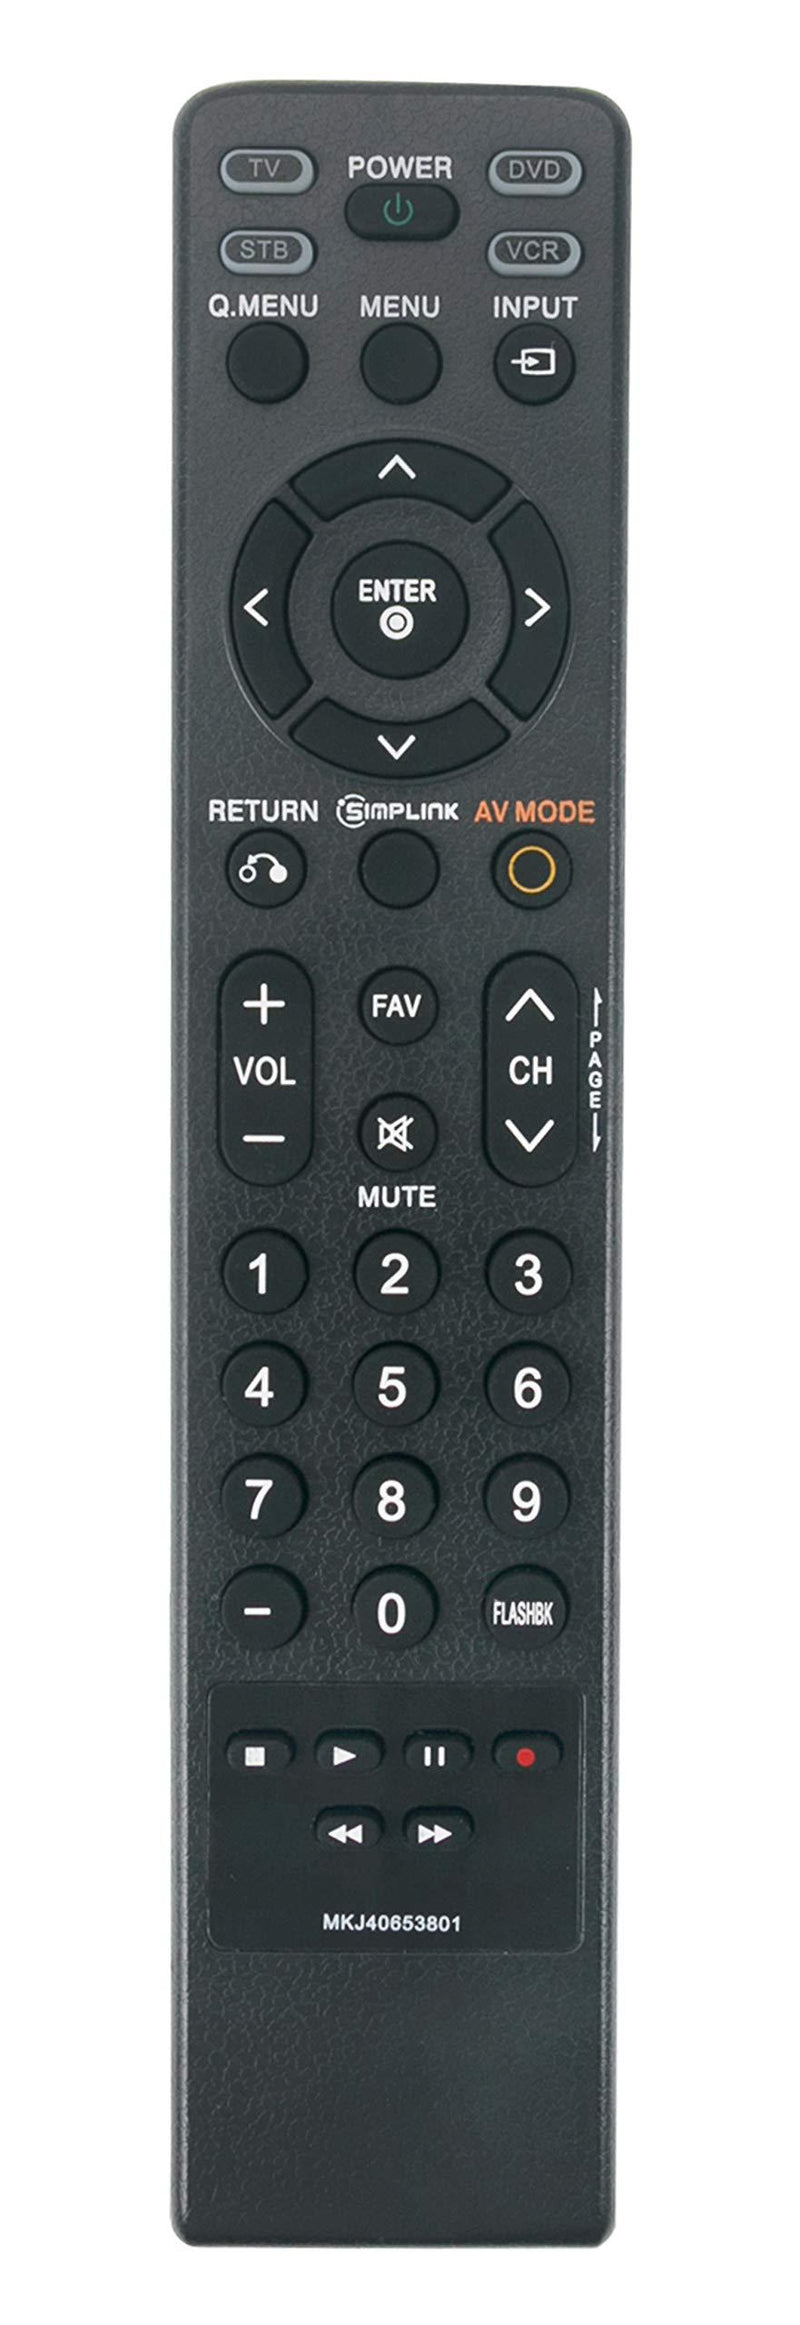 MKJ40653801 Replaced Remote fit for LG LCD Plasma TV 37LG50 37LG30 47LG50 42LGx 52LG50 32LG60 32LG70 37LG60 42LG70 42LG60 47LG70 47LG60 52LG70 52LG60 47LG90 42PG25 42LG50 50PG25 50PG60 60PG60 50PG70